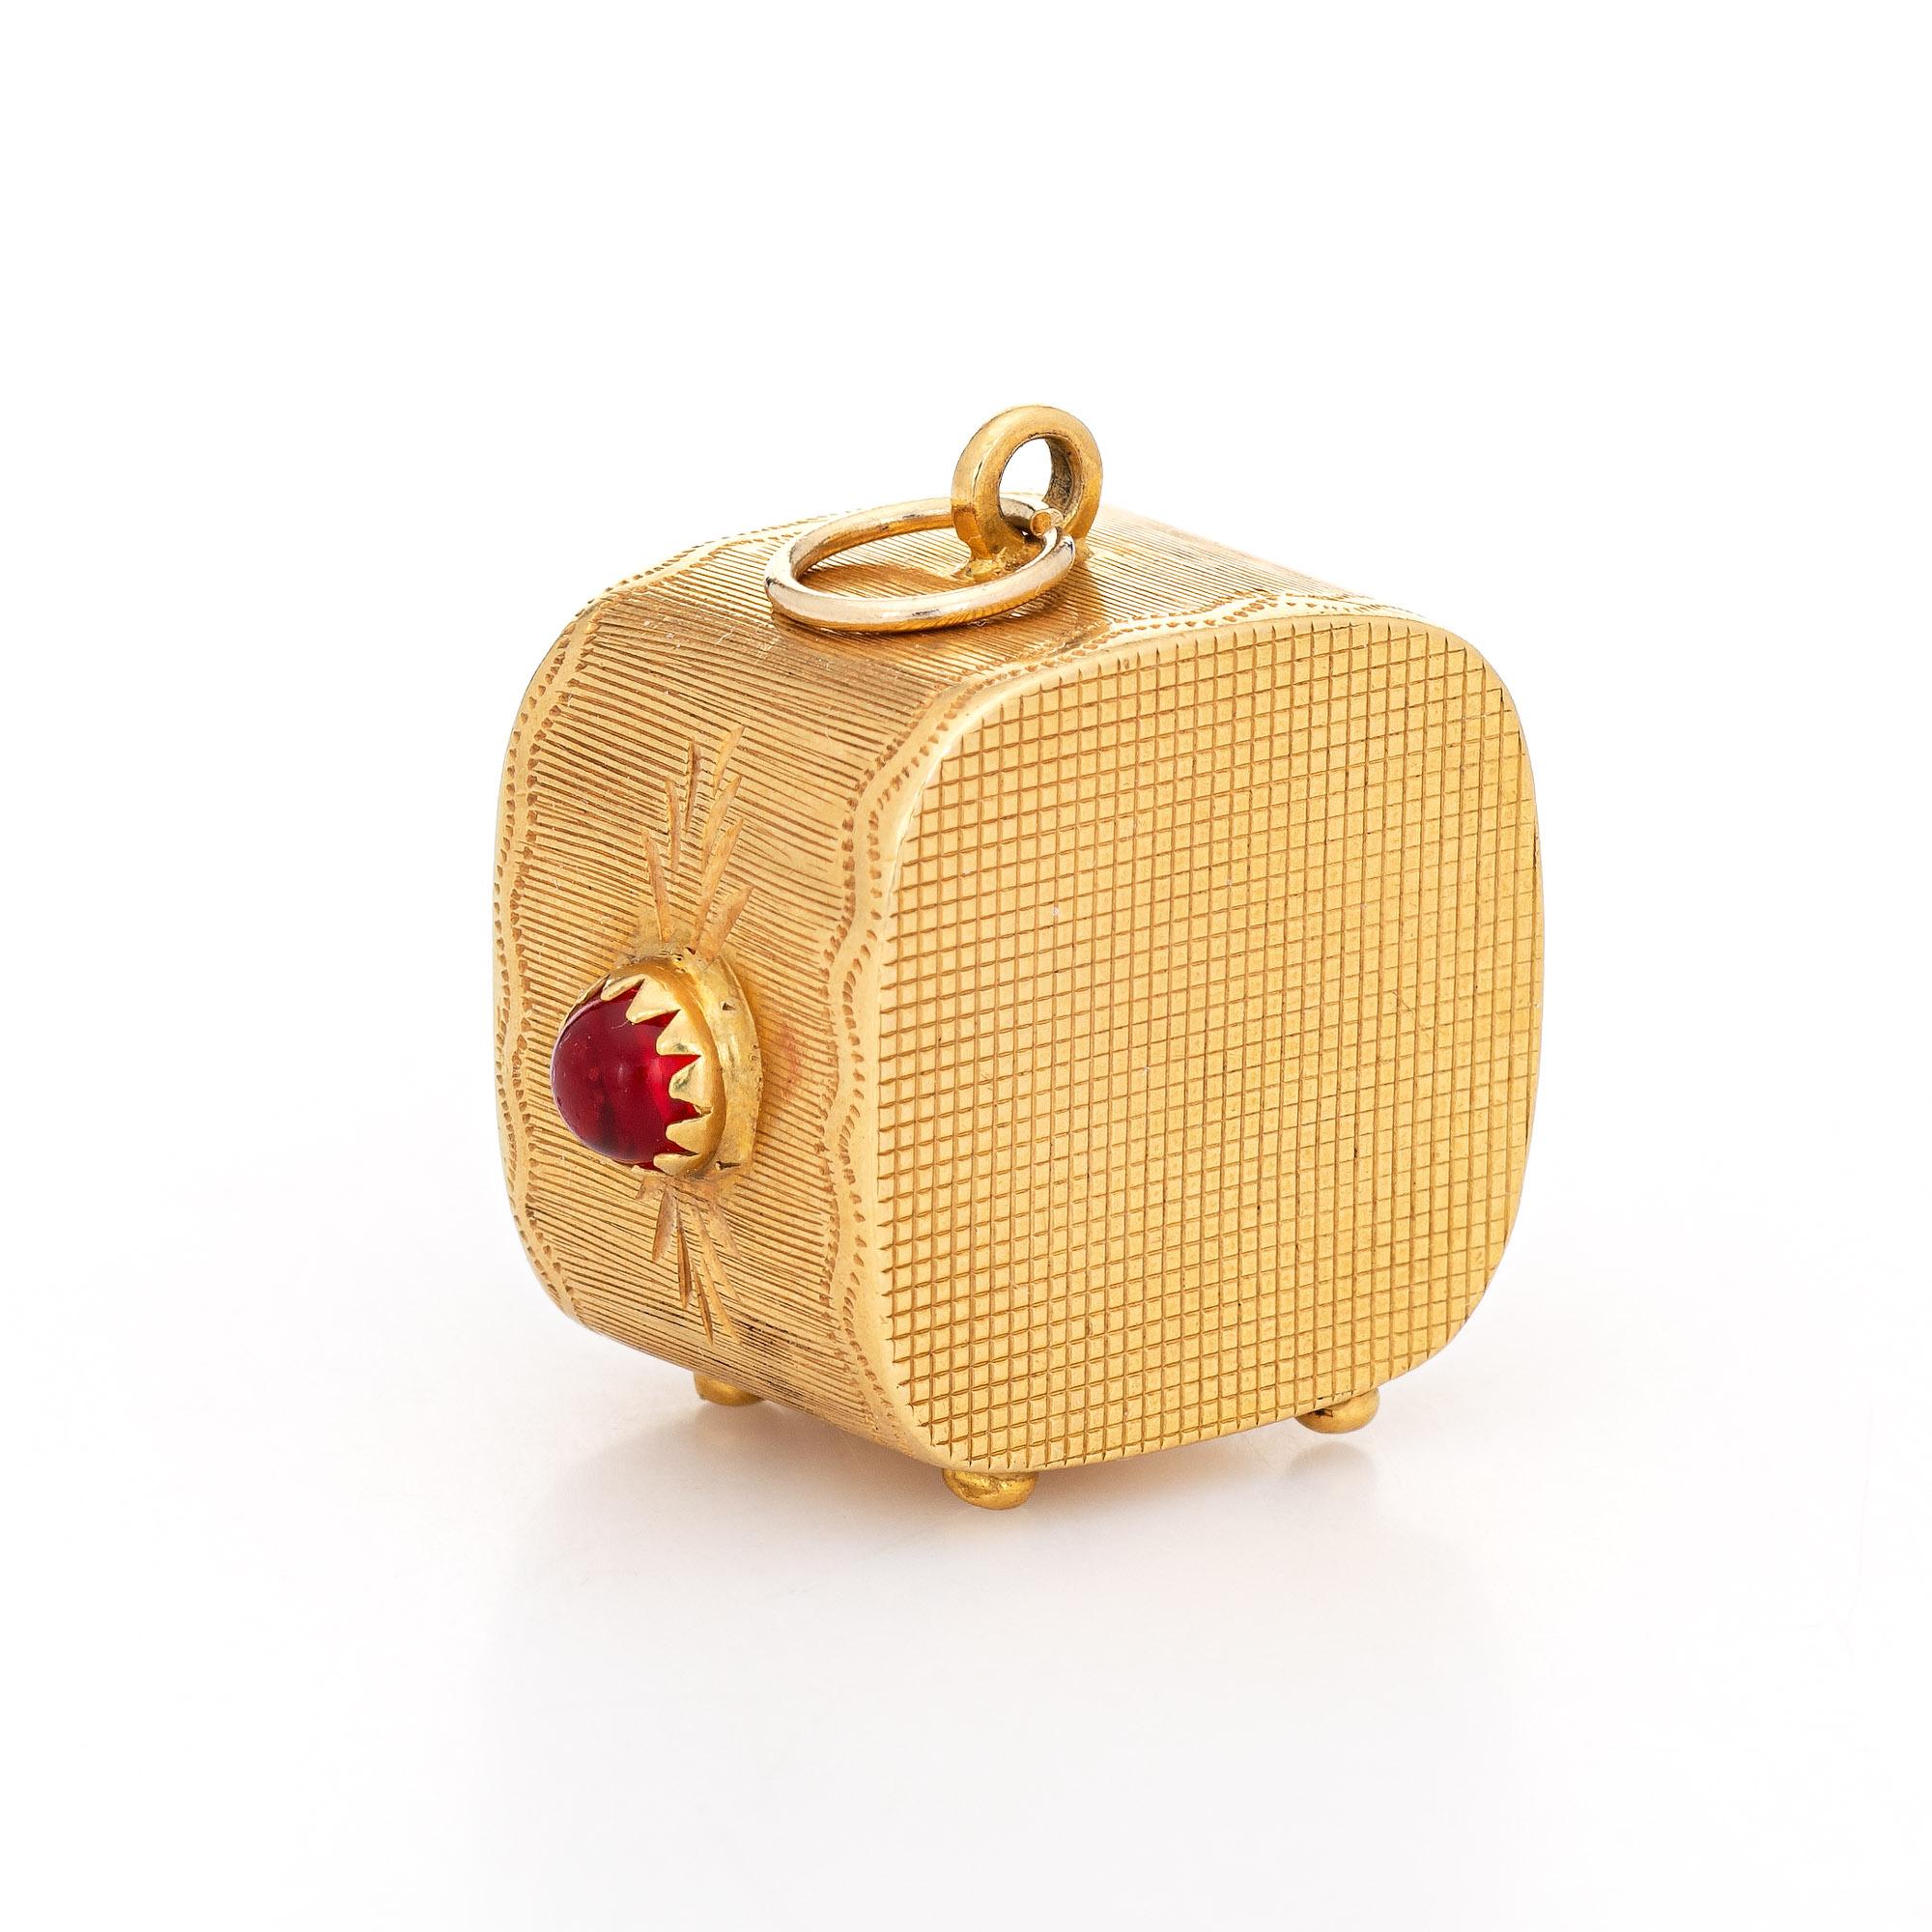 Finely detailed vintage TV set charm crafted in 18k yellow gold (circa 1960s).  

Red Stones measure 14mm x 12mm (center) and 4mm (sides). The stones are in excellent condition and free of cracks or chips. 

The unique charm is crafted in the form